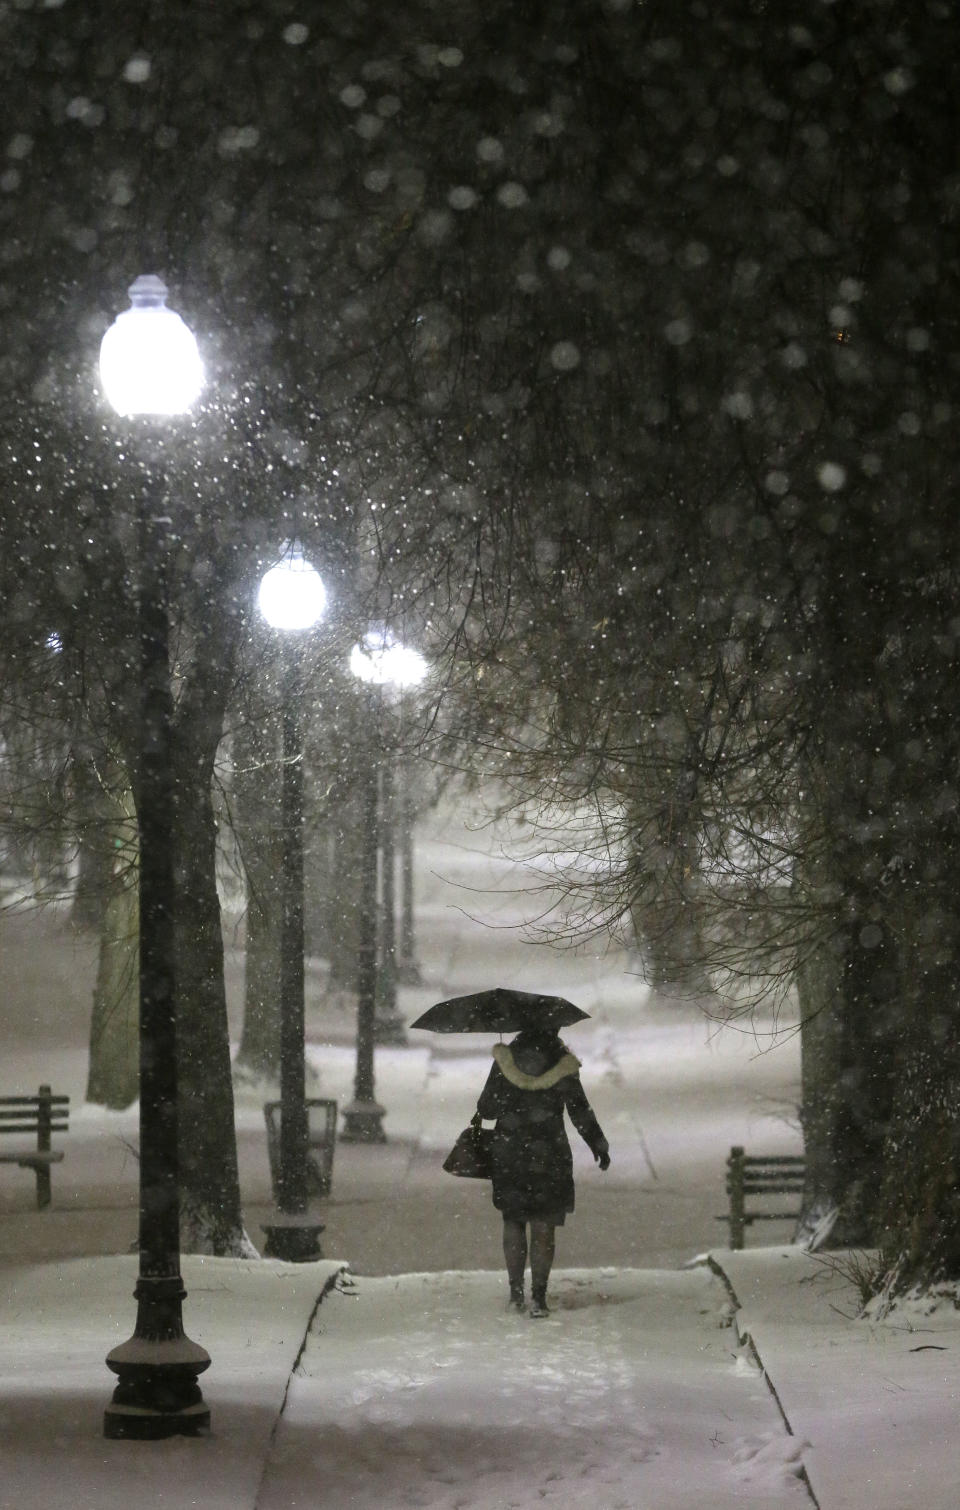 A woman uses an umbrella while walking along a snow-covered path in the Boston Common park, Tuesday, Jan. 21, 2014, in Boston. Heavy snow has been forecast and a blizzard warning was posted for portions of Massachusetts Tuesday, prompting Gov. Deval Patrick to dismiss nonemergency state workers early and postpone his annual State of the State address. (AP Photo/Steven Senne)